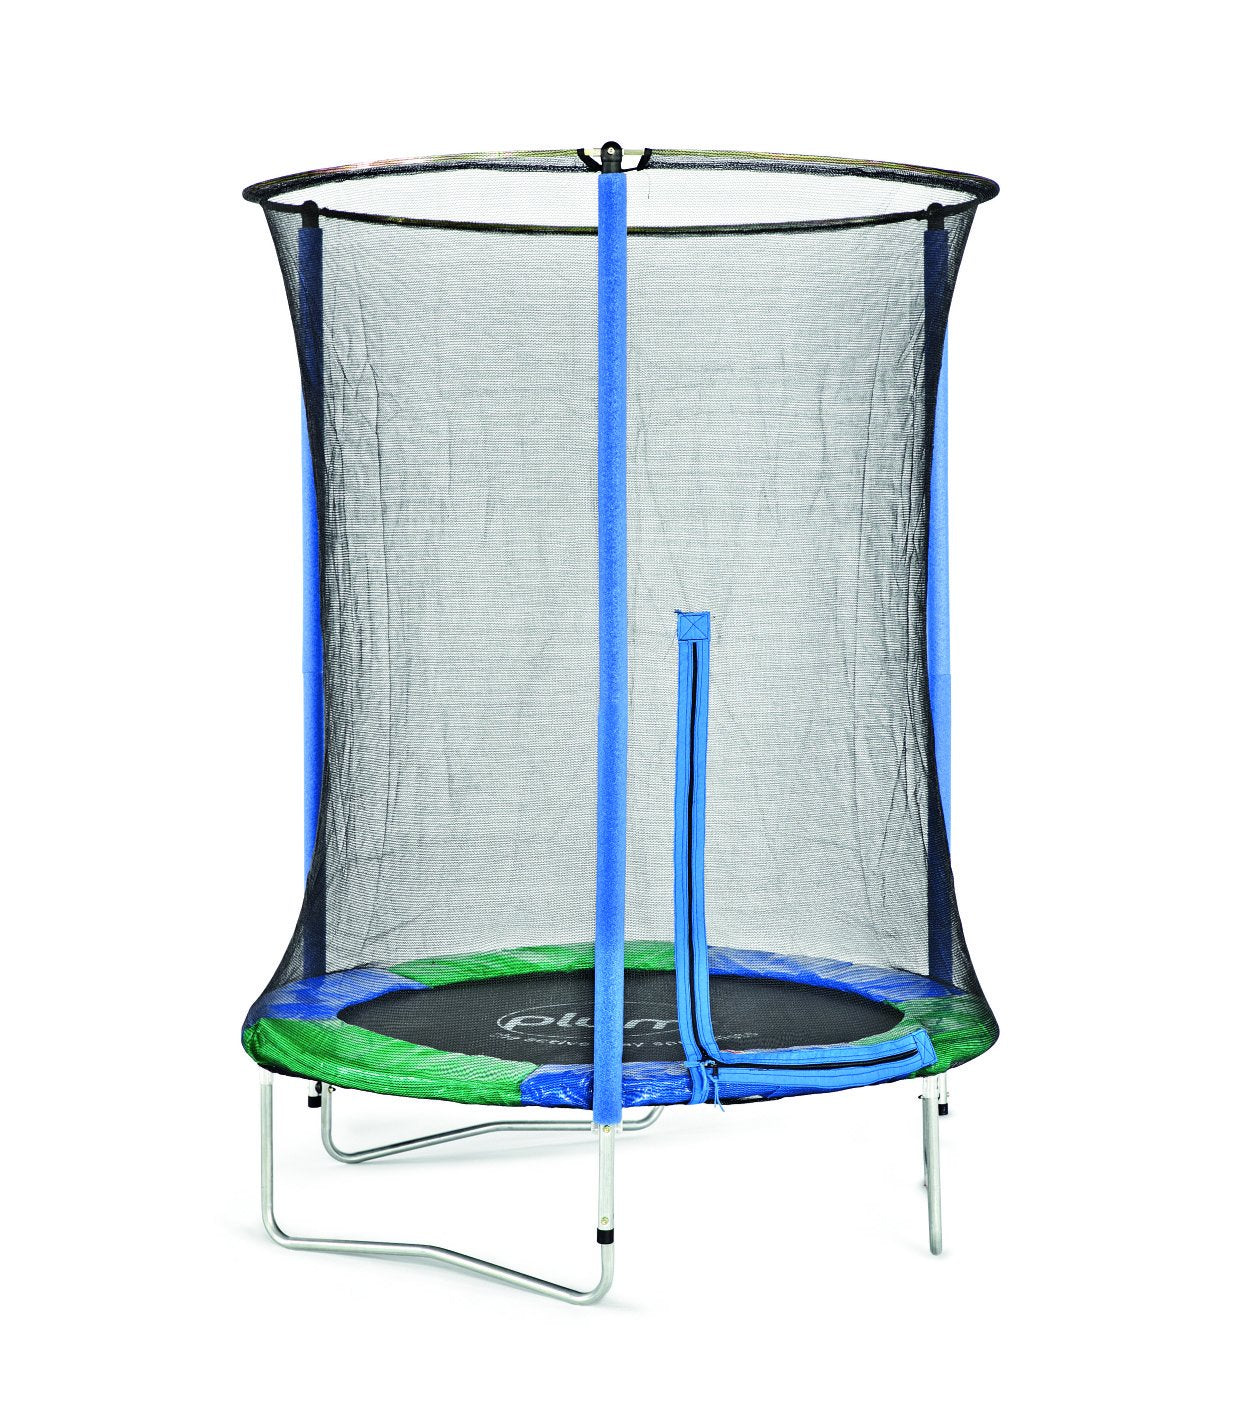 Junior Trampoline and Enclosure with Safety Net | Plum